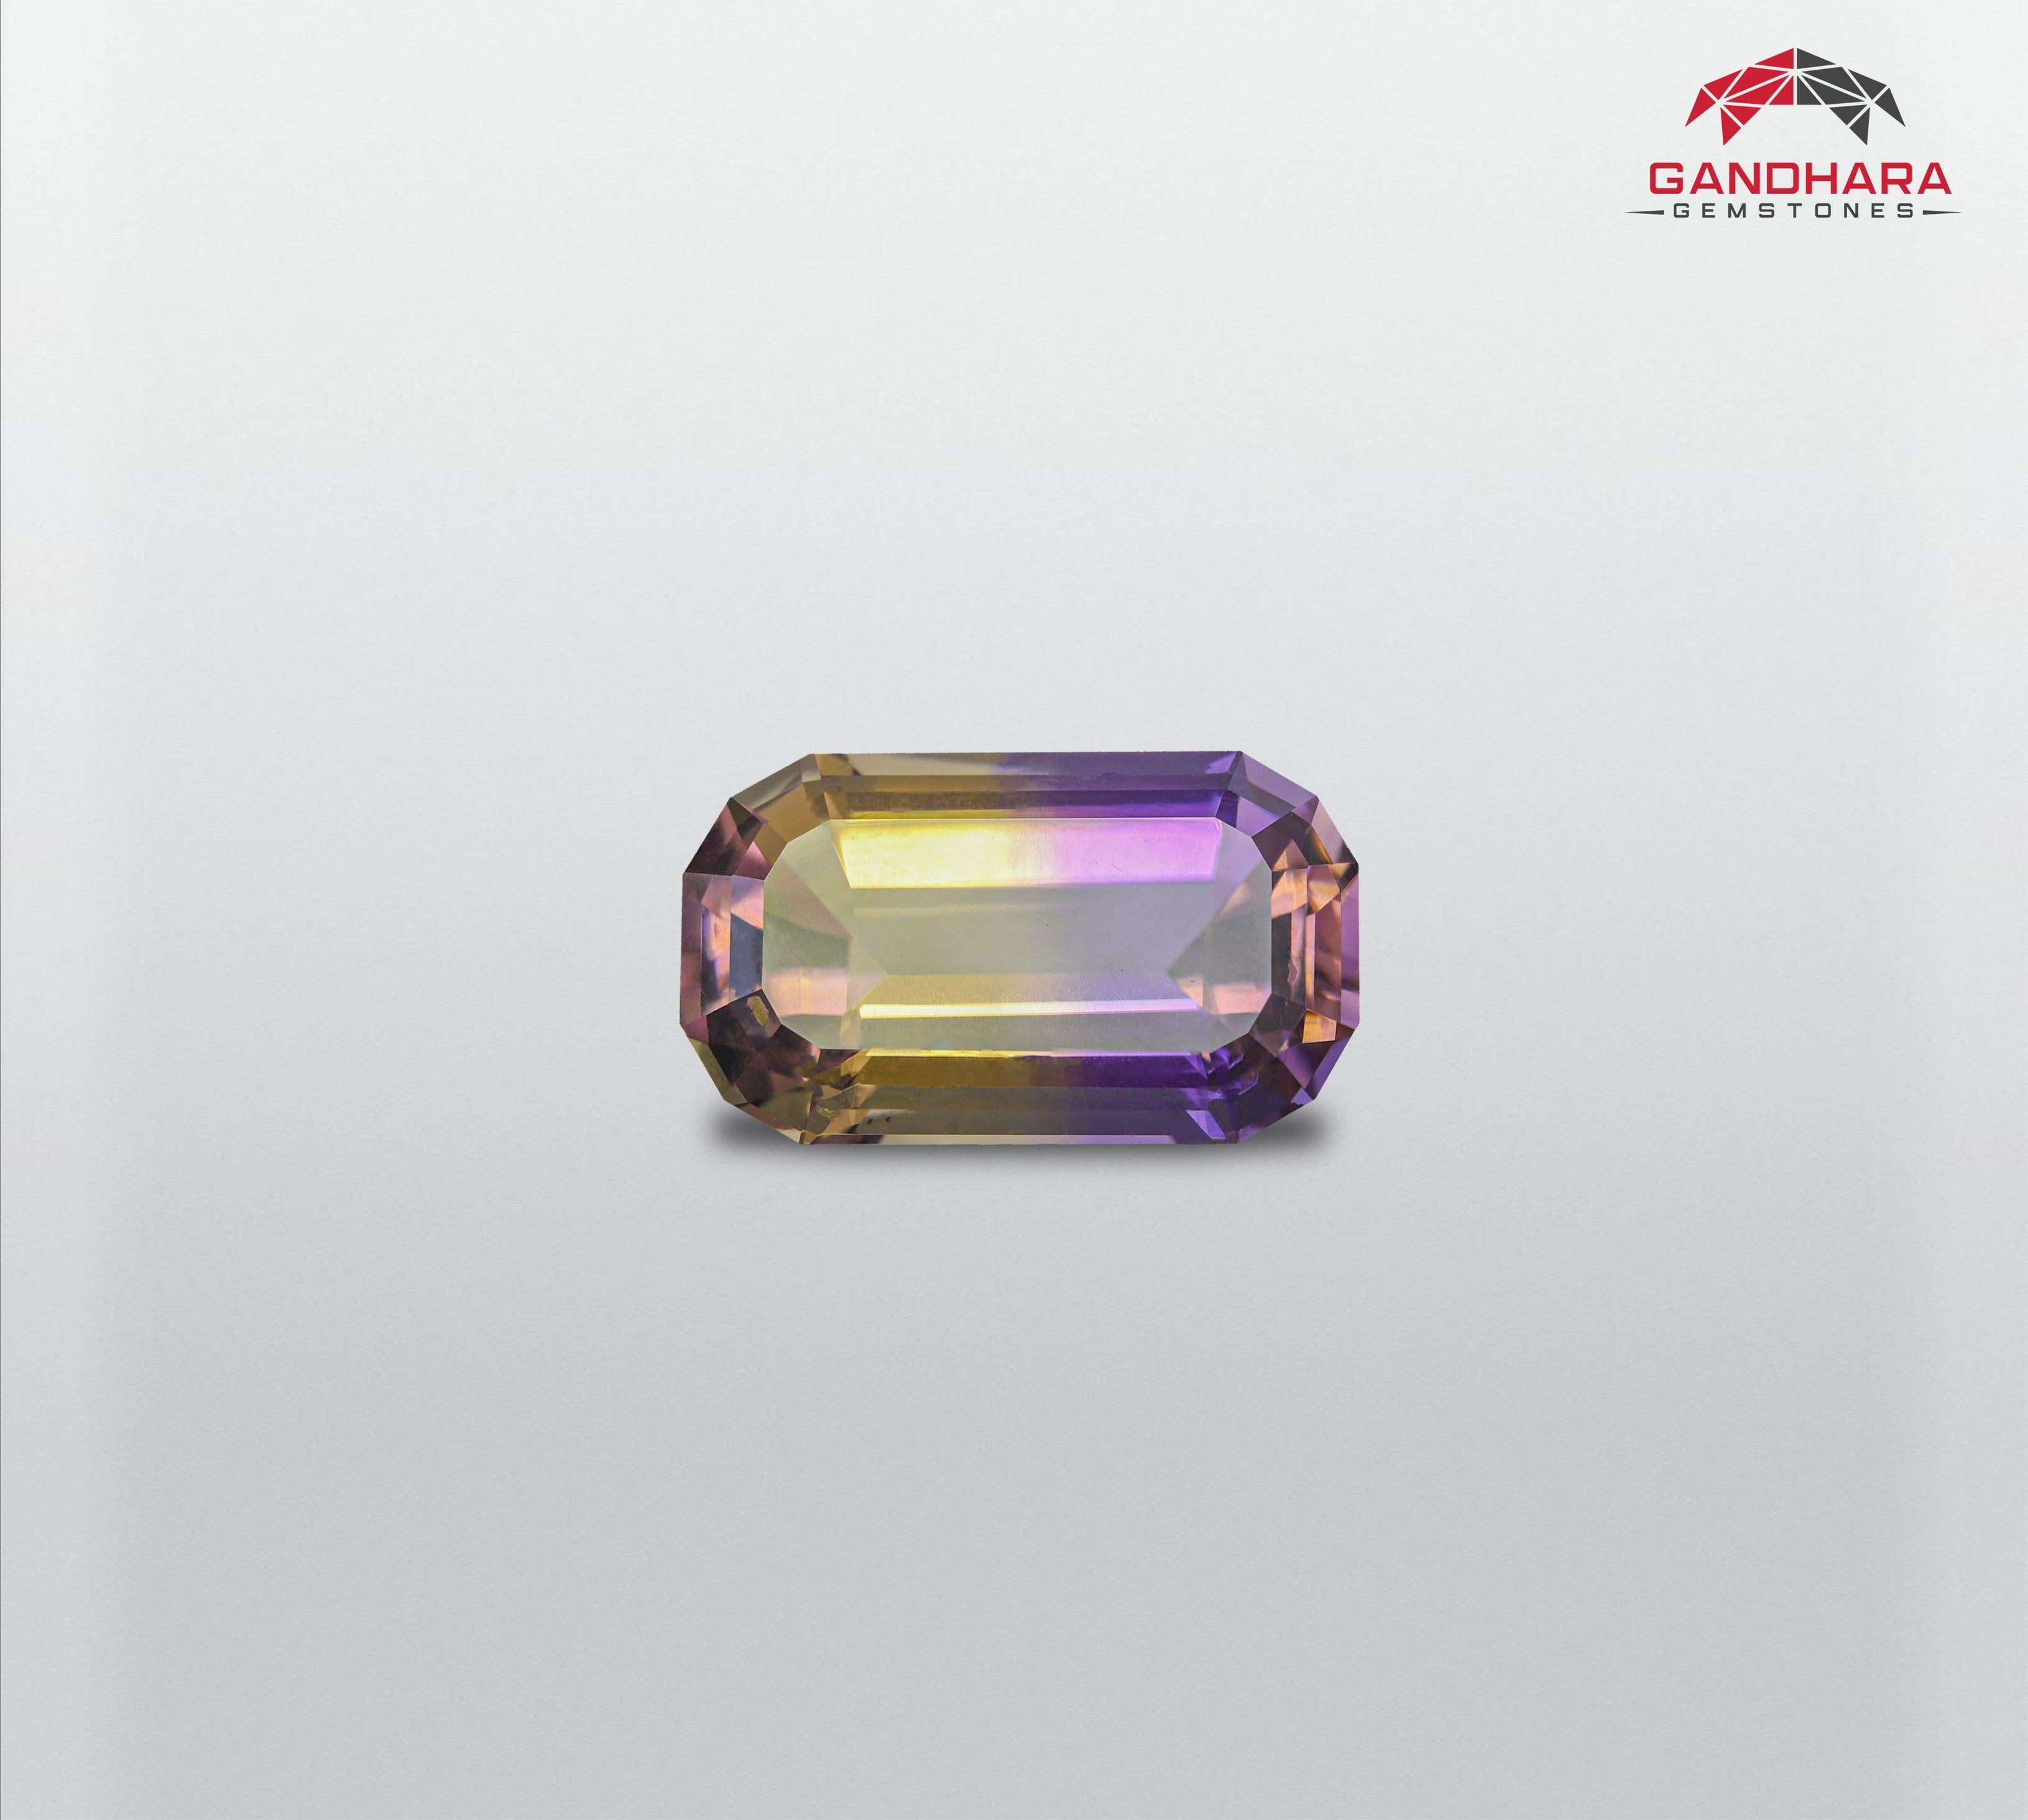 Lustrous Loose Ametrine Stone of 13.035 carats from Bolivia has a wonderful cut in a Oval Like shape, incredible Bi-color. Great brilliance. This gem is totally Loupe-clean.

Product Information:
GEMSTONE TYPE:	Lustrous Loose Ametrine Stone
WEIGHT: